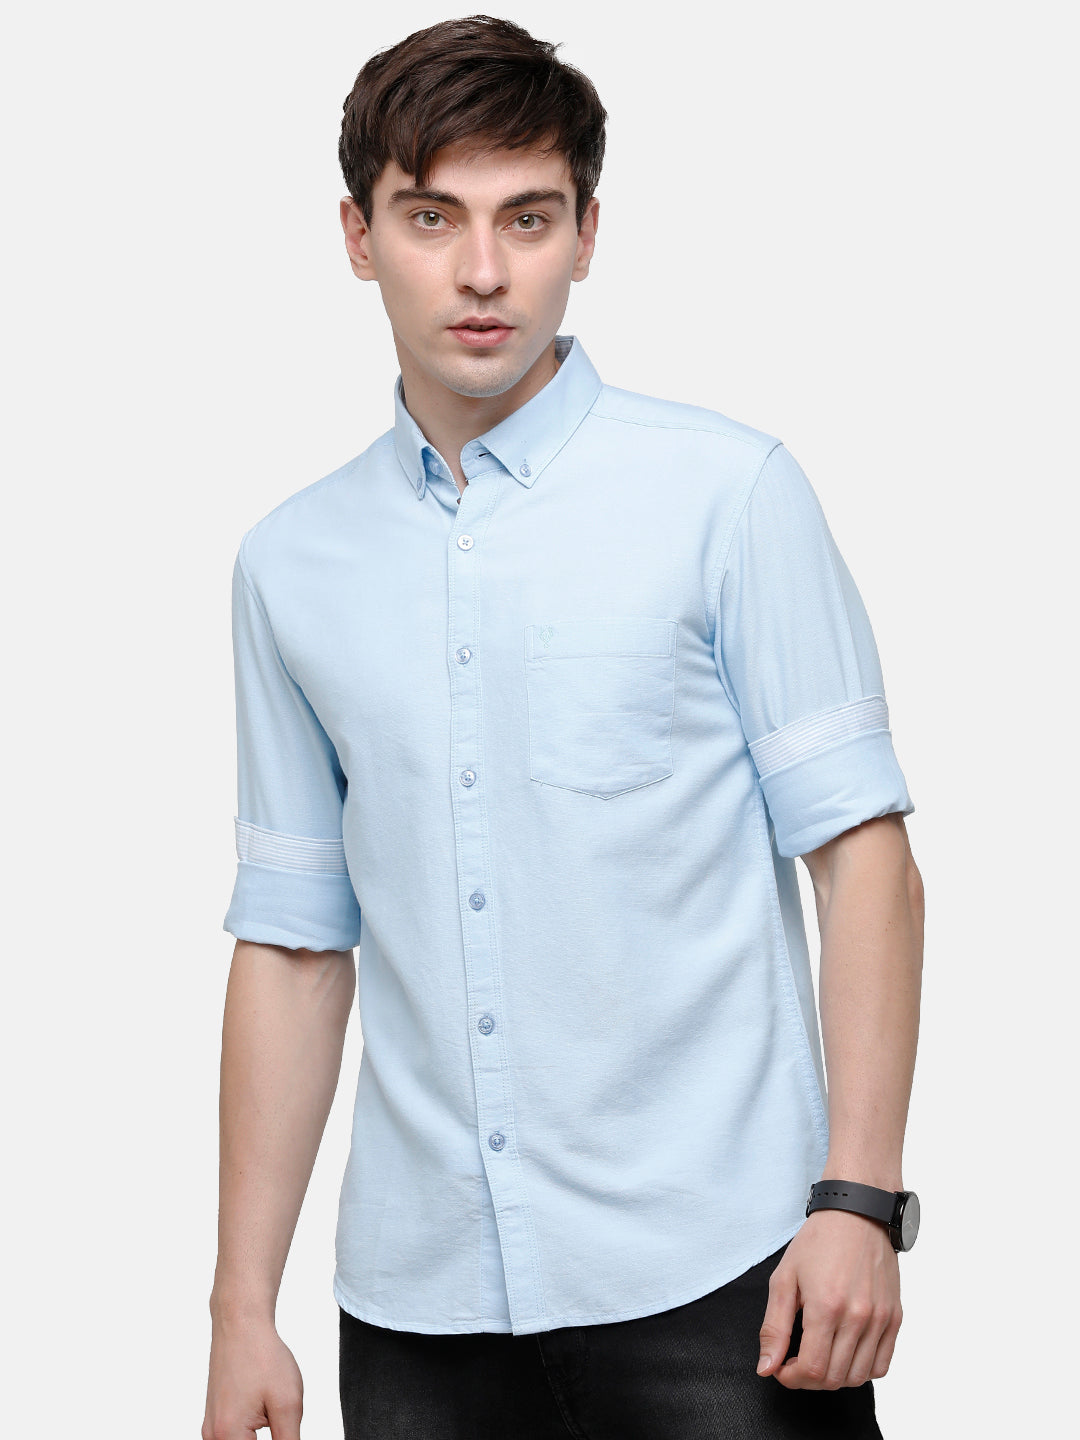 Classic Polo Men's Cotton Light Blue Solid Full Sleeve Shirt - Enzo ...